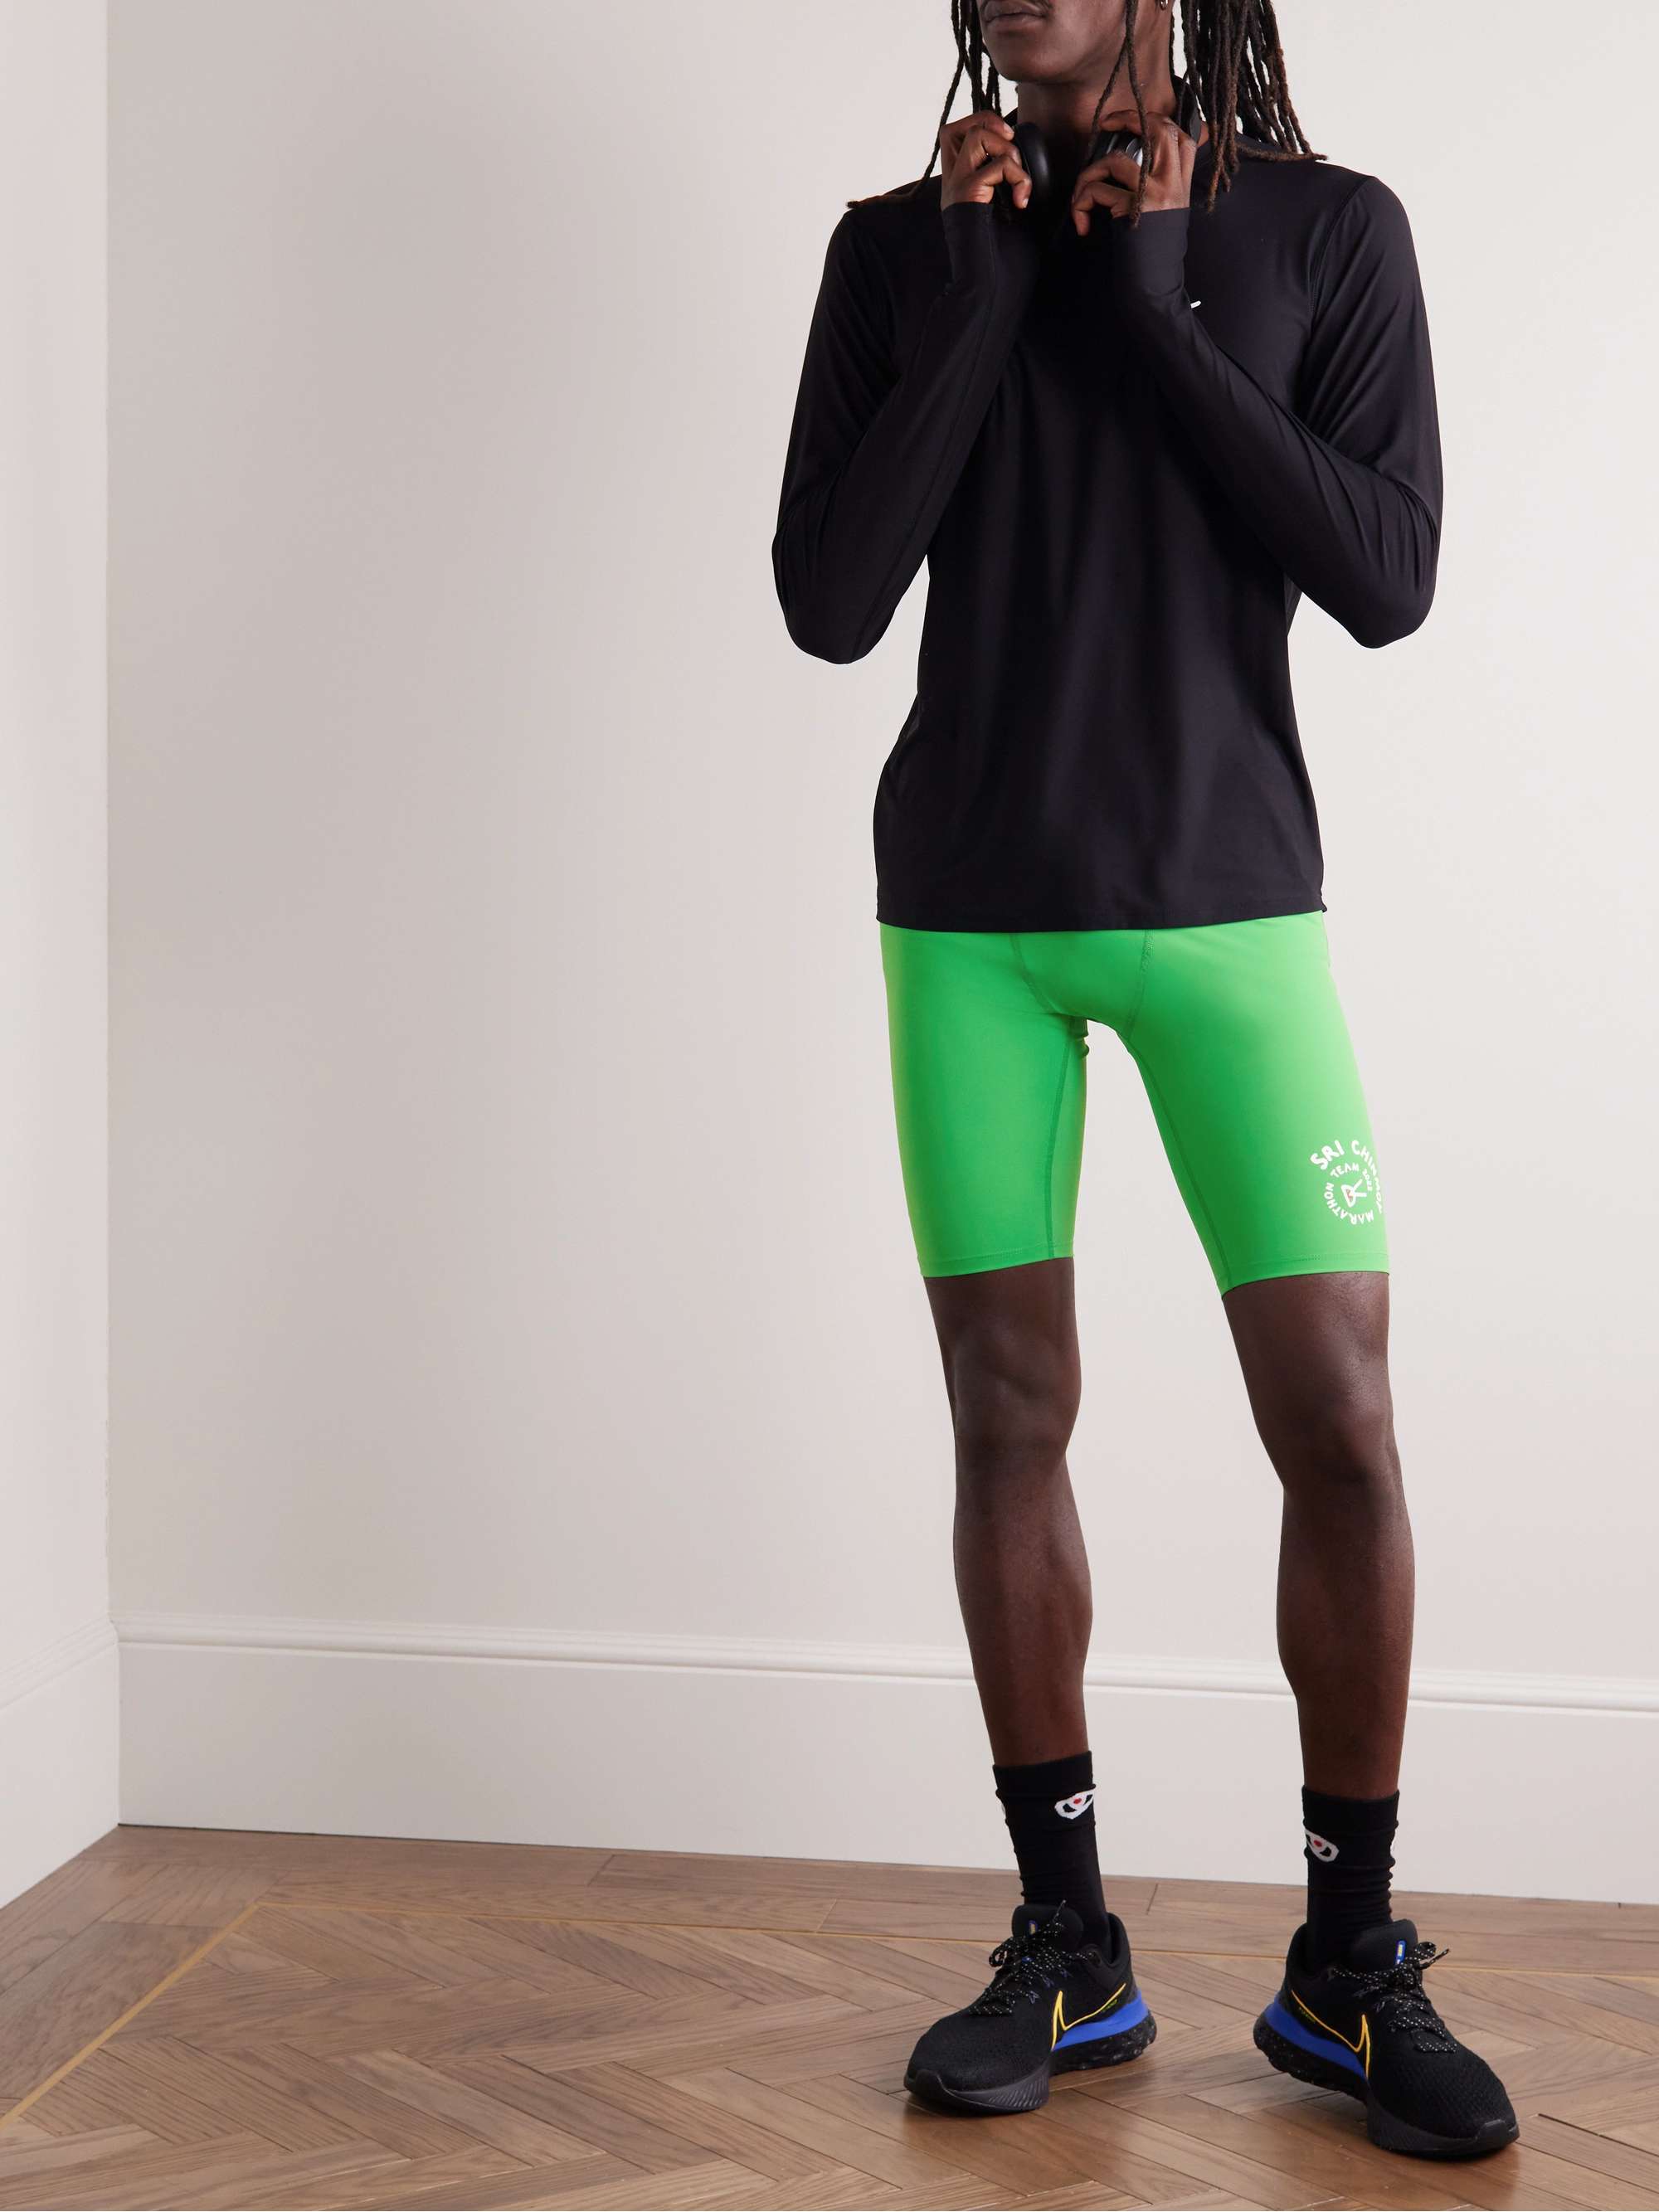 DISTRICT VISION + Sri Chinmoy Centre TomTom Speed Tight Stretch Tech-Shell Running Shorts